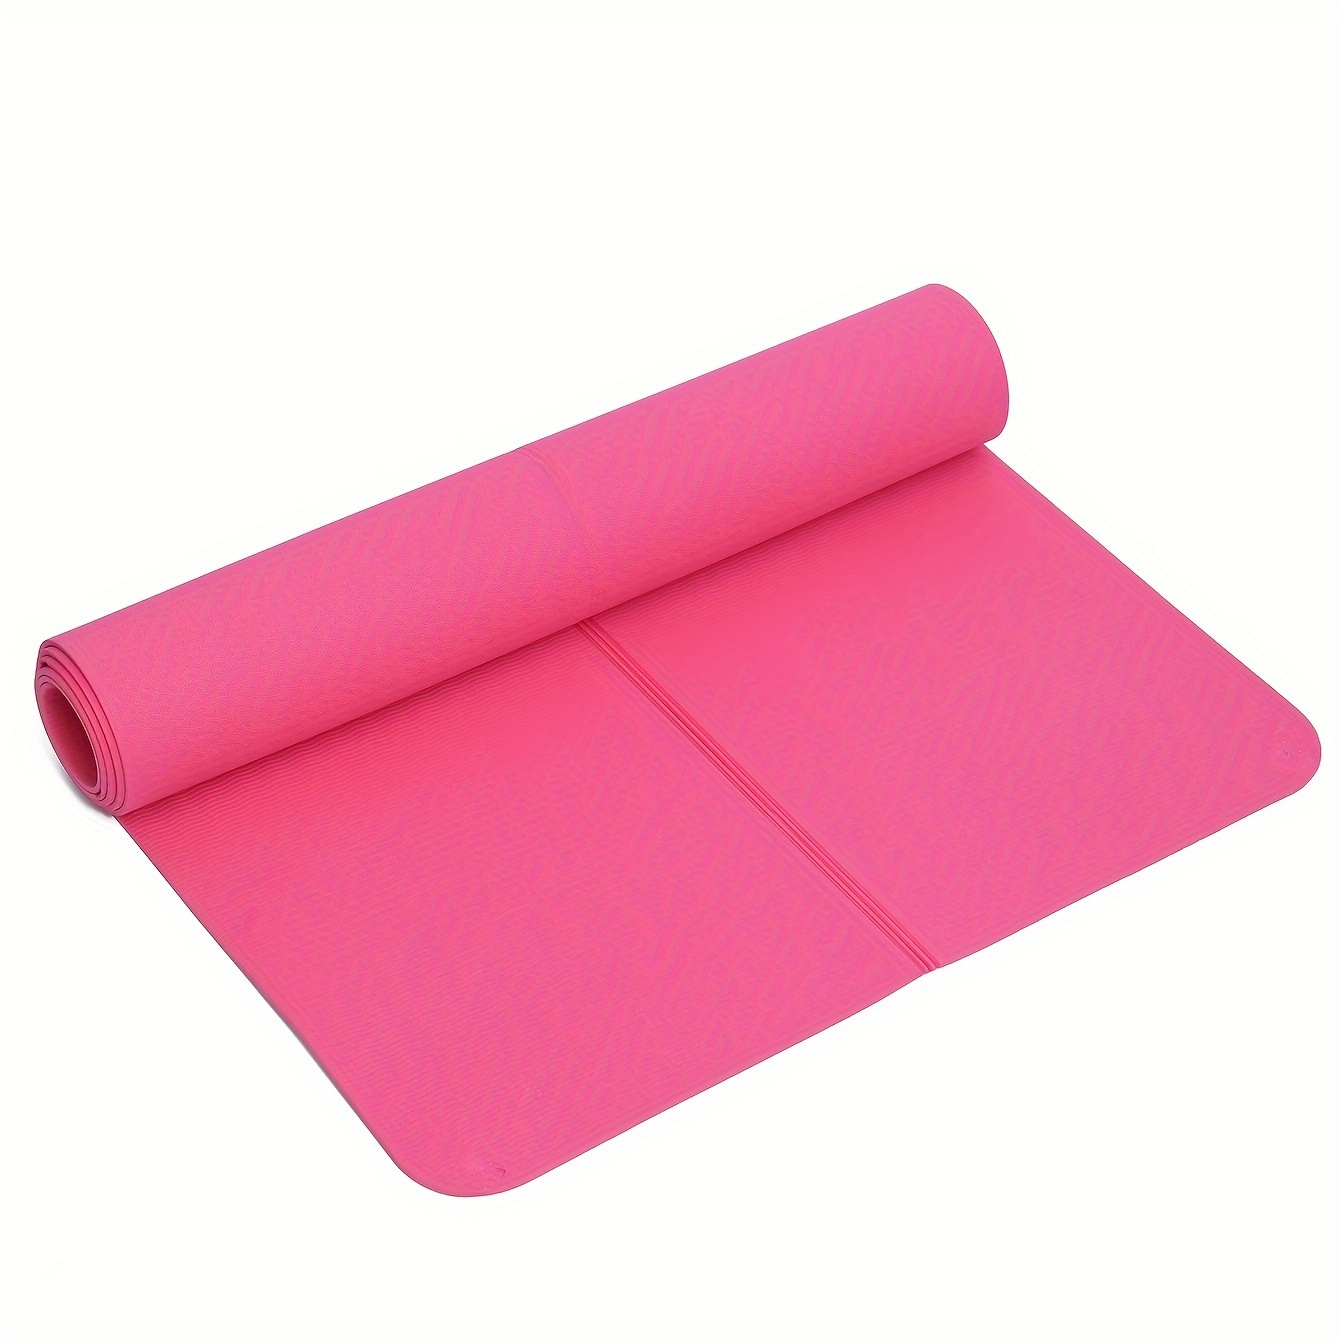 Yoga Mat / Gym Mat with Cover - 4MM